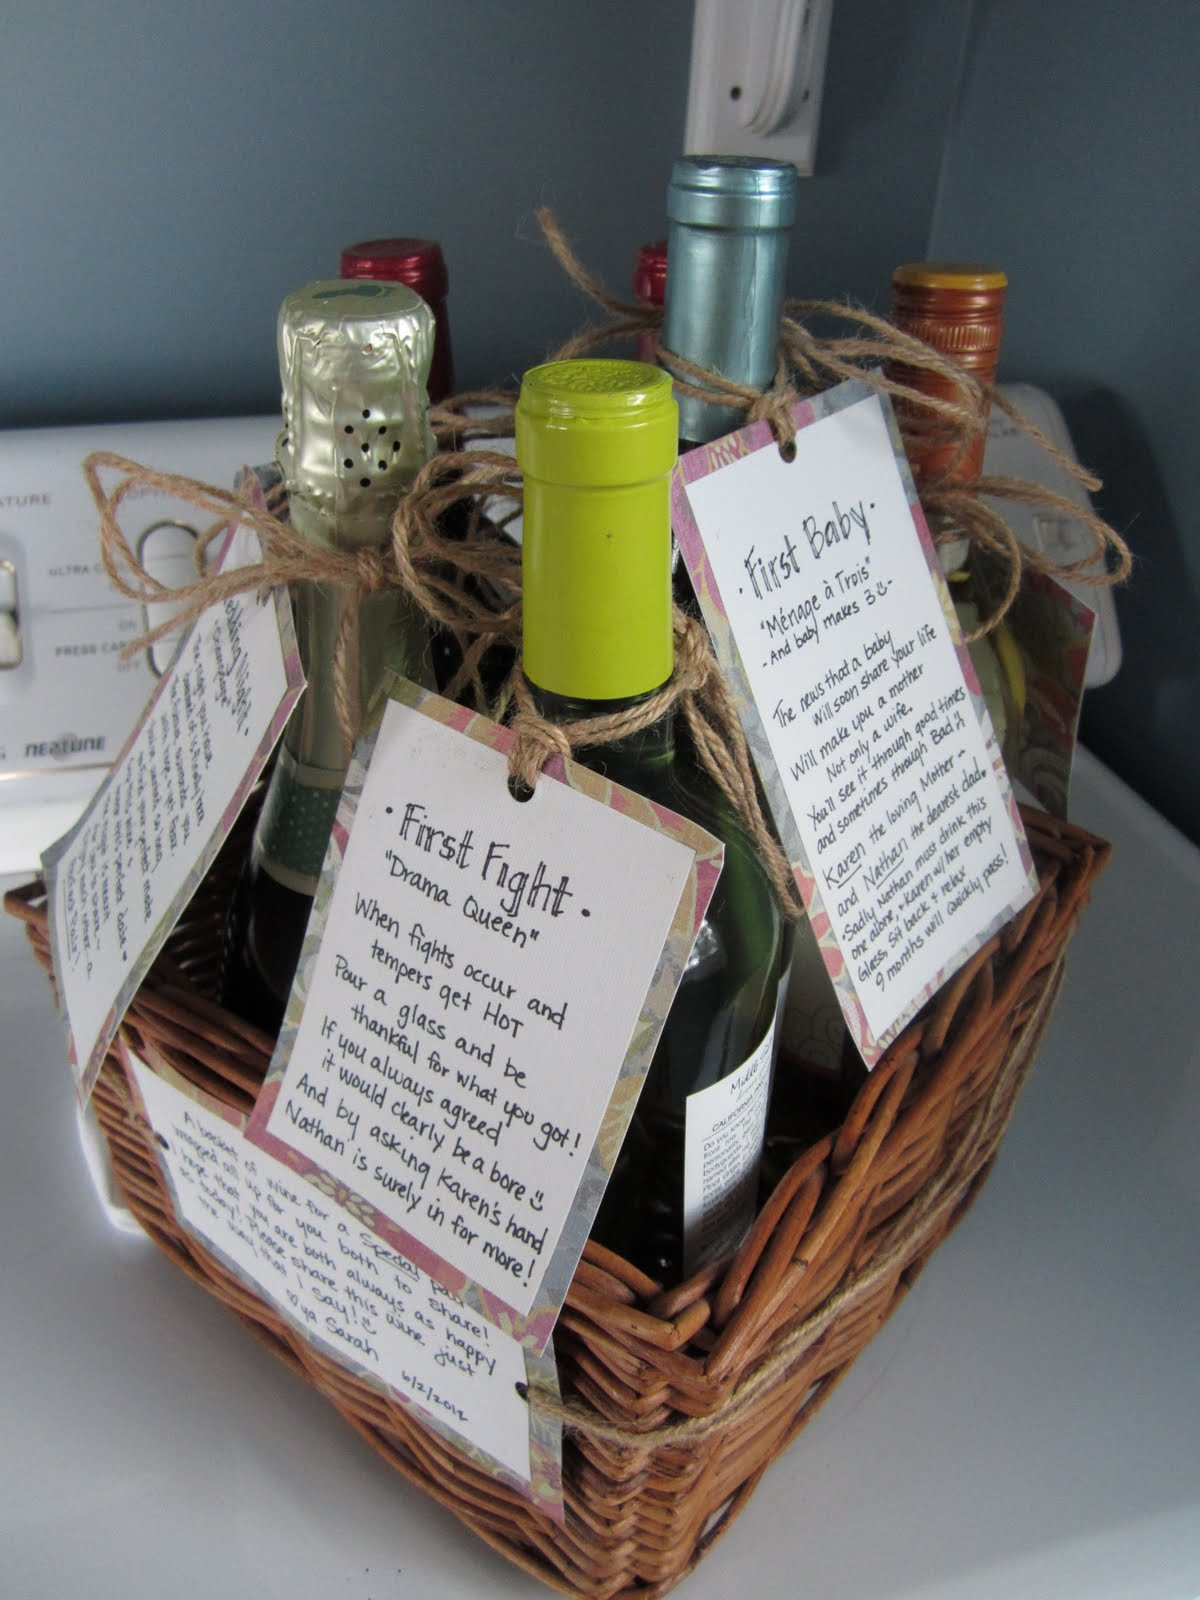 Wine Wedding Gift Ideas
 5 Thoughtful Wedding Shower Gifts that Might Not Be on the